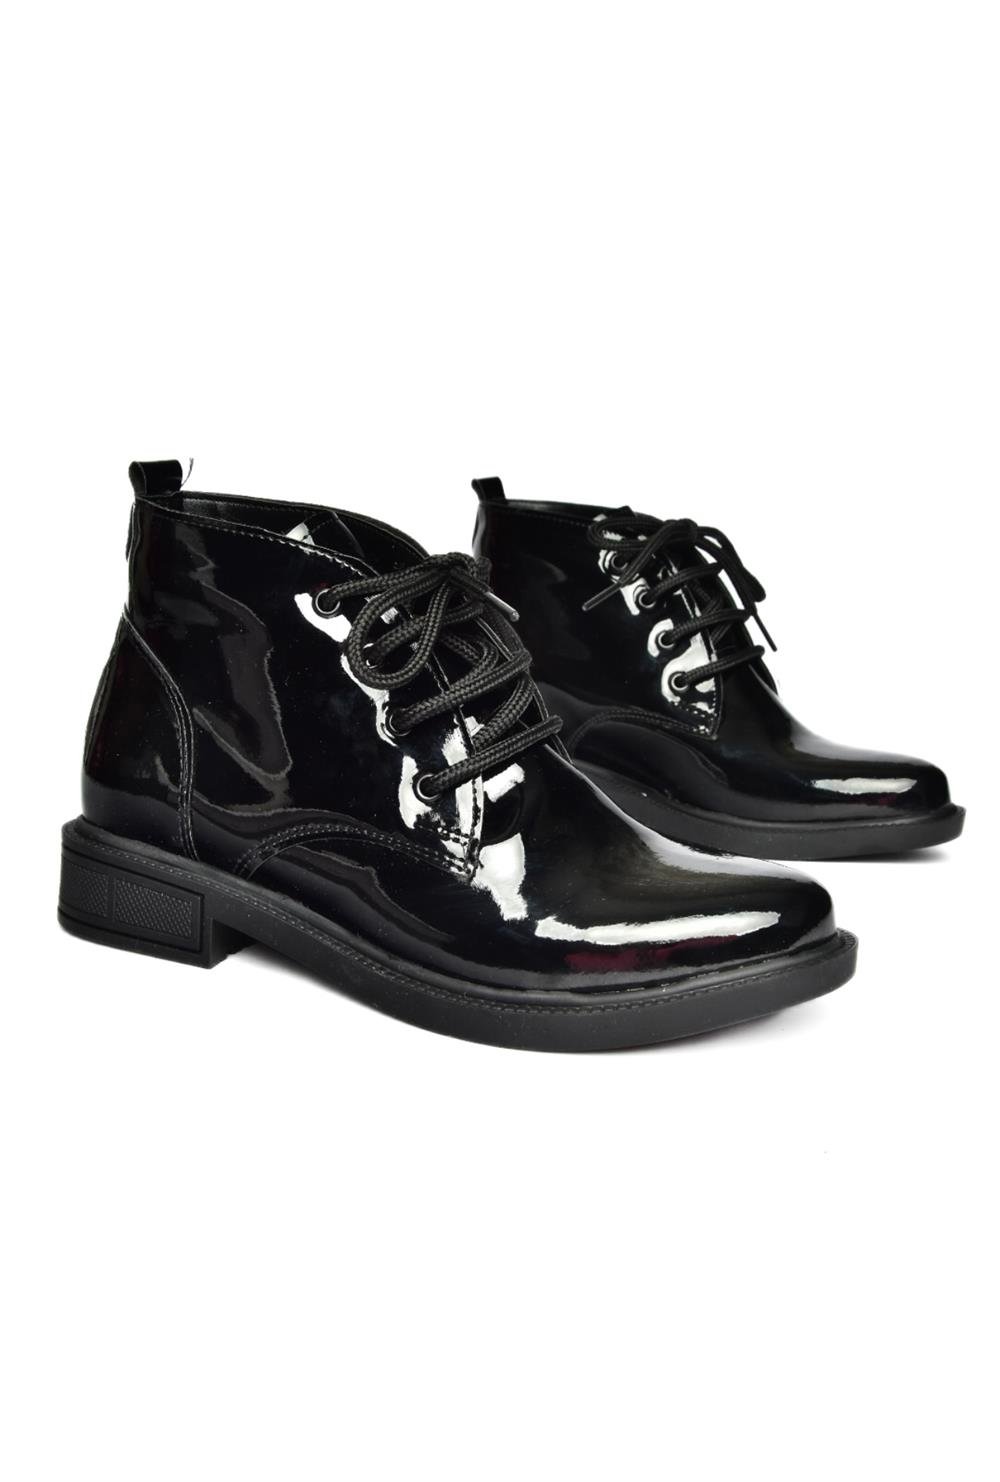 Black Patent Leather Classic Women's Boots